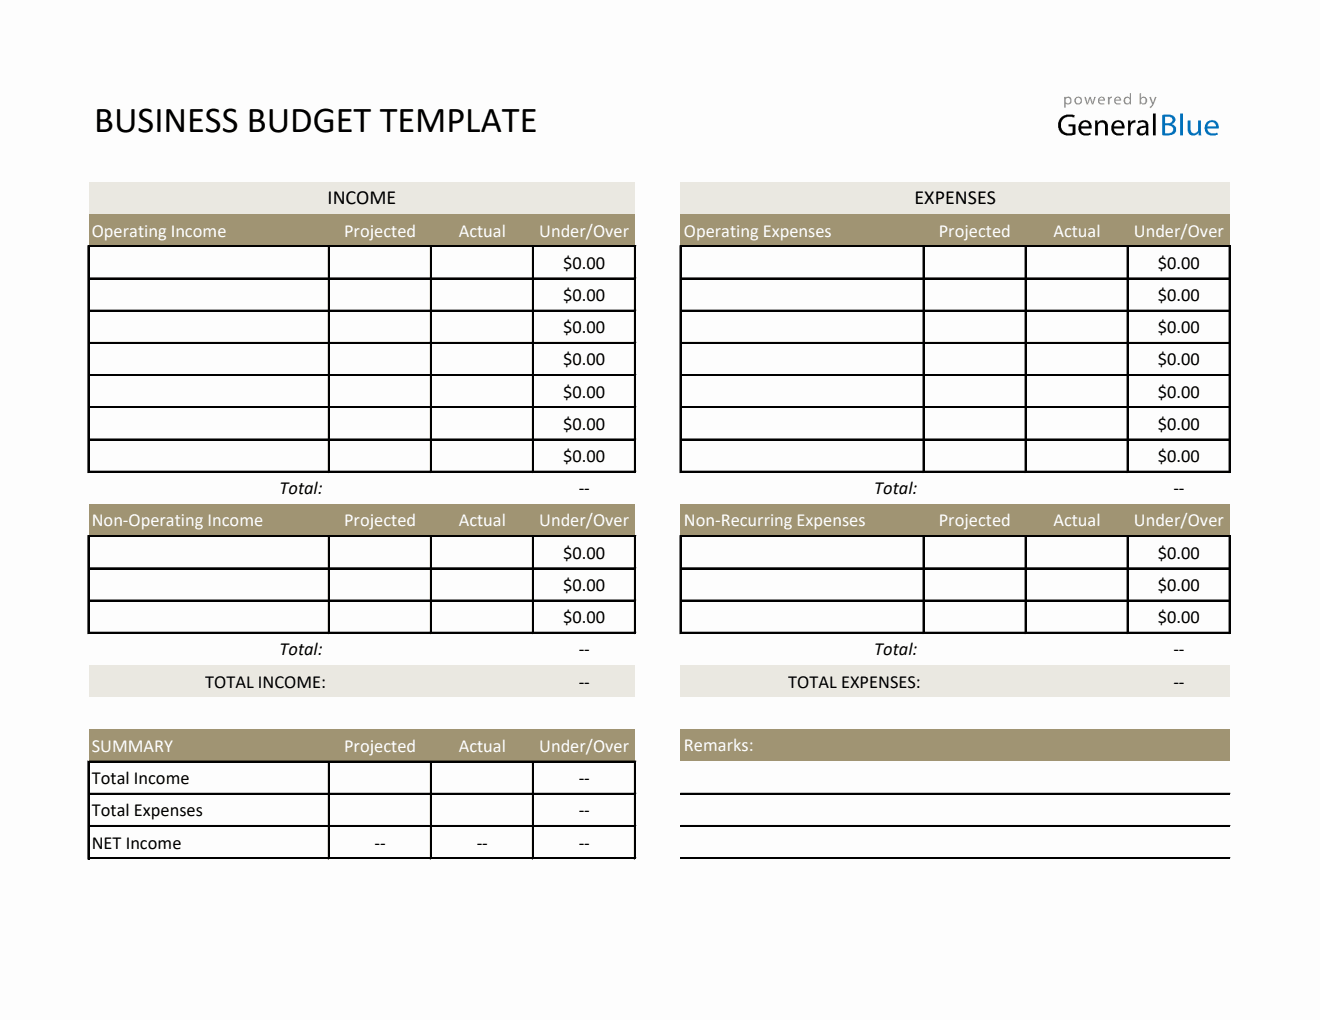 Printable Business Budget Template in Excel (Basic)